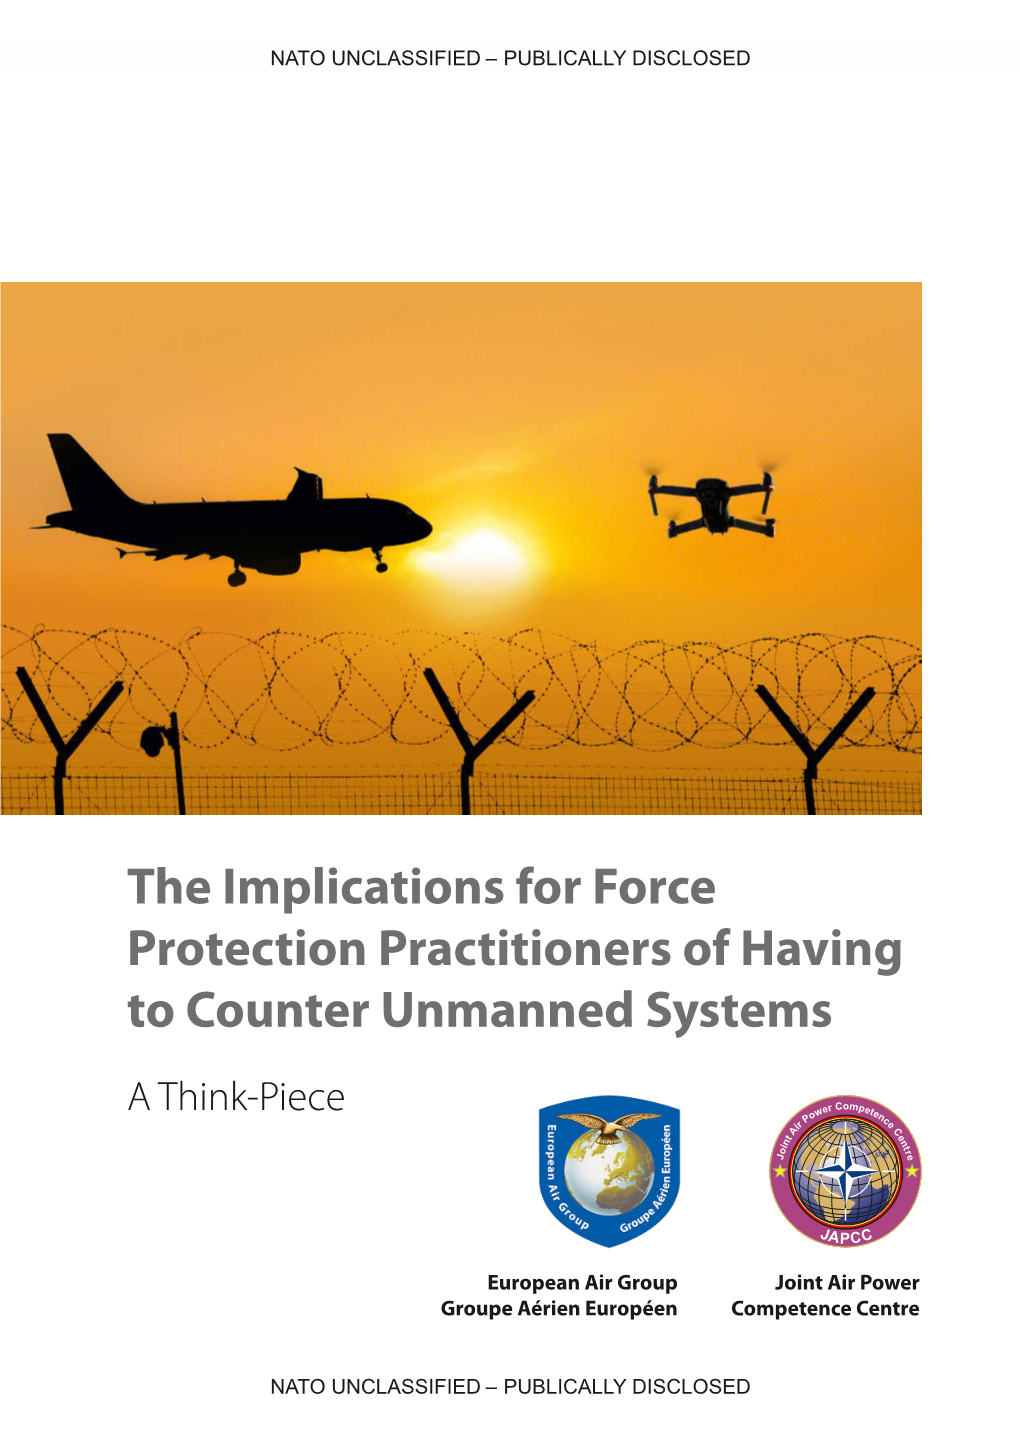 Think-Piece on the Implications for Force Protection Practitioners of Having to Counter Unmanned Systems